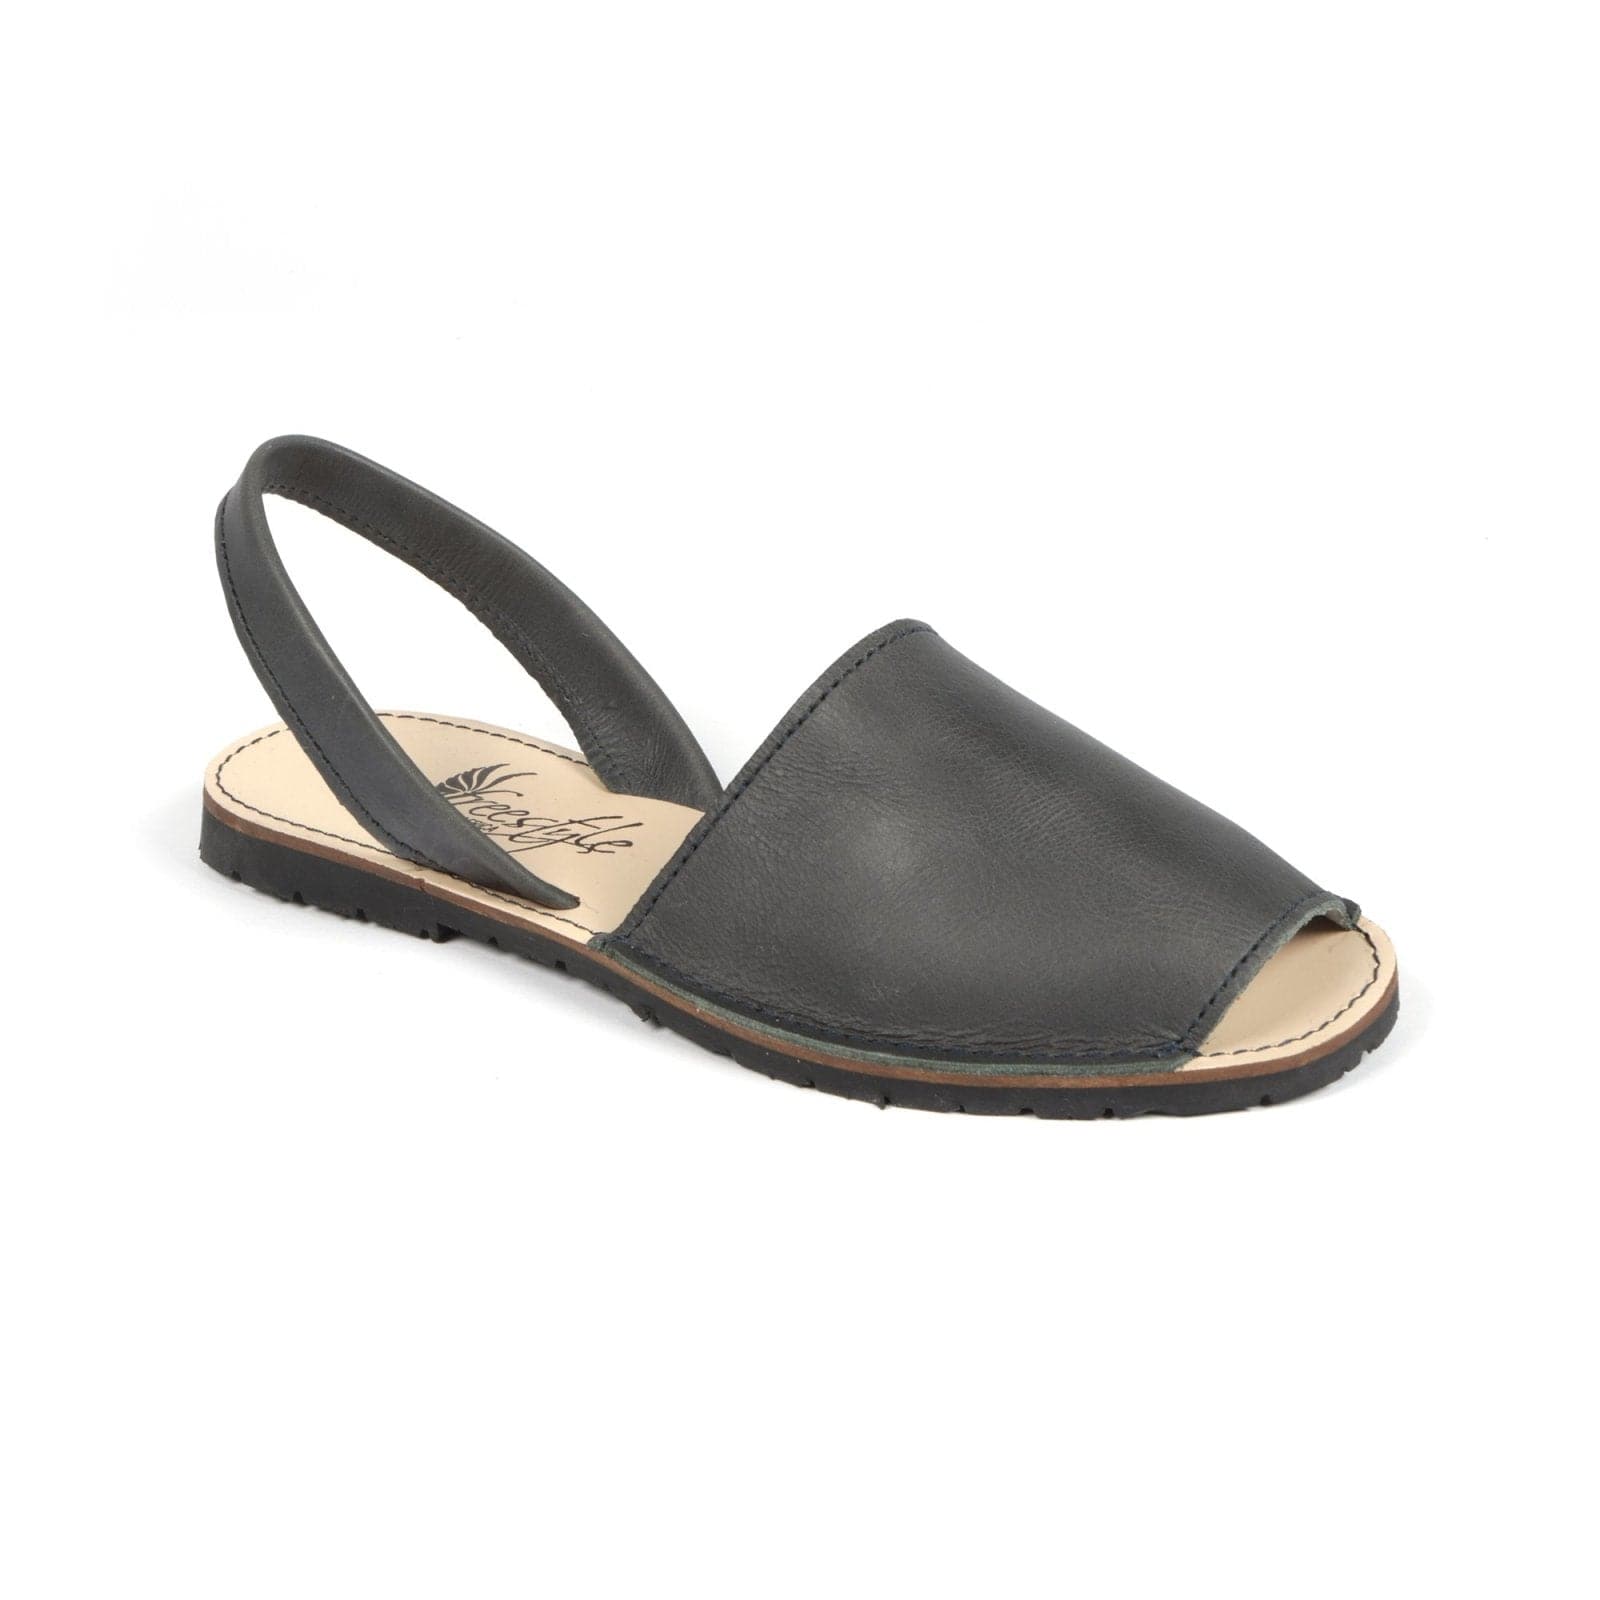 Women's Leather Sandals, Platforms and Wedges - Freestyle SA